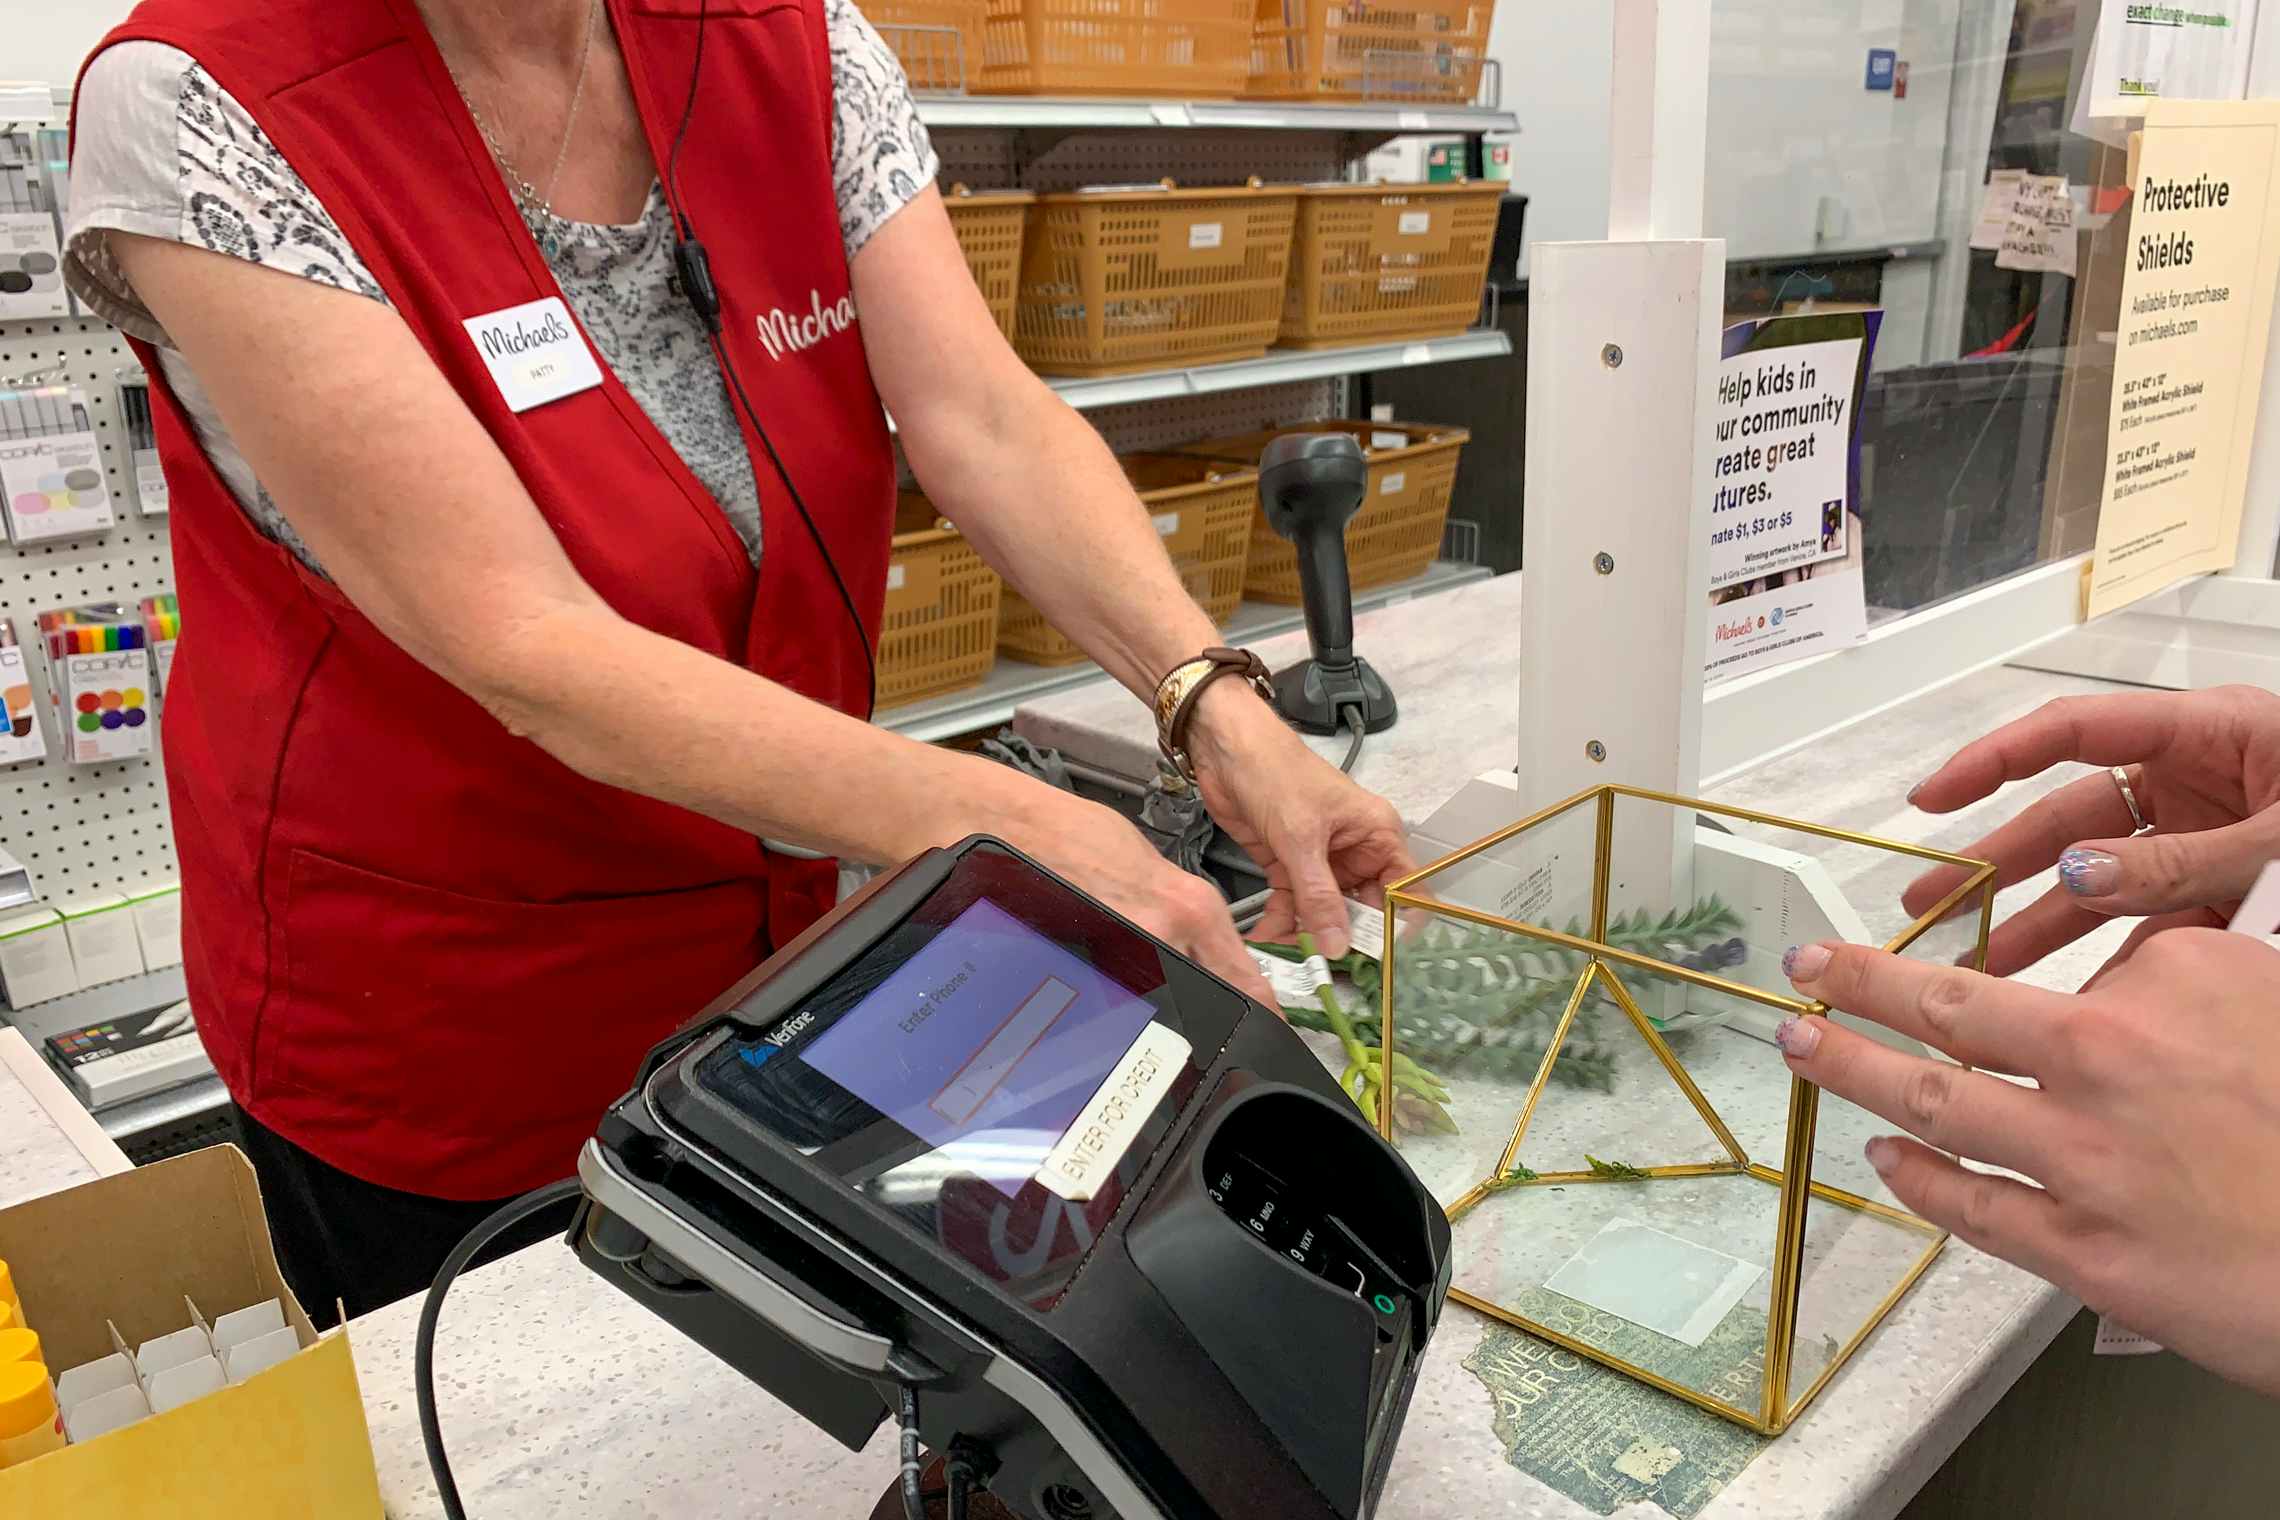 A Michaels employee ringing up purchases at the checkout.